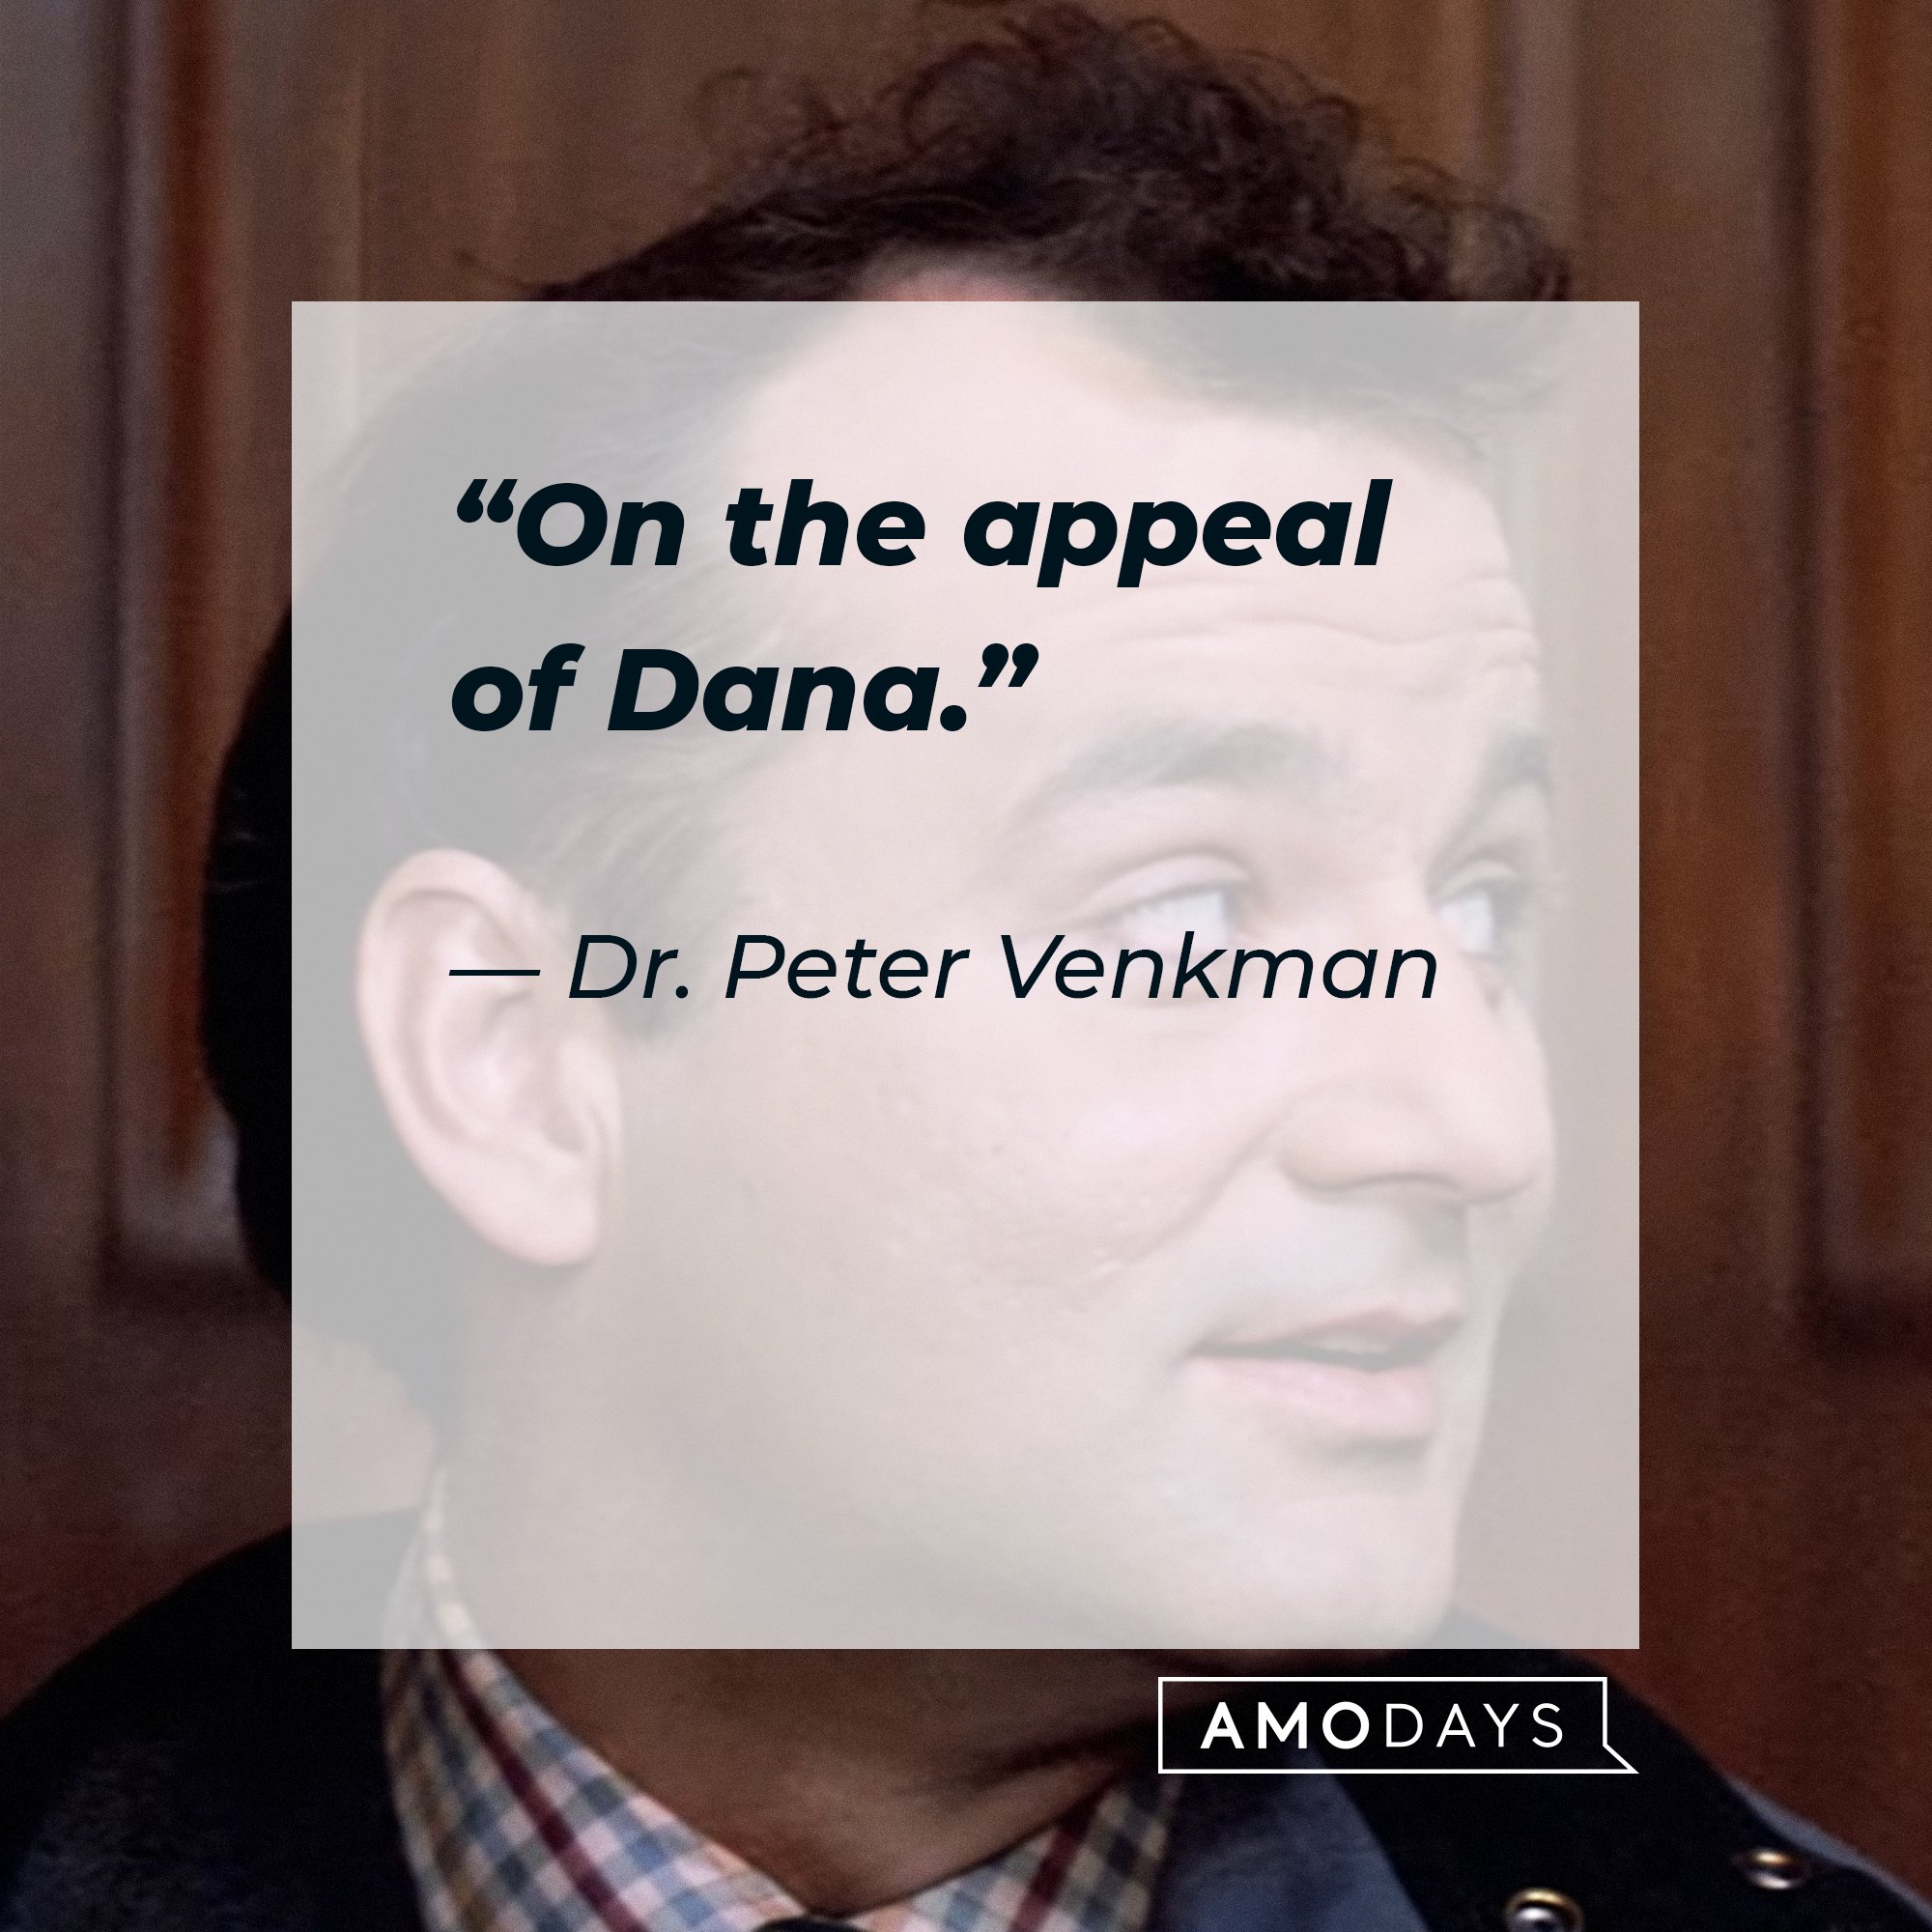 Dr. Peter Venkman's quote: “On the appeal of Dana.” | Image: AmoDays